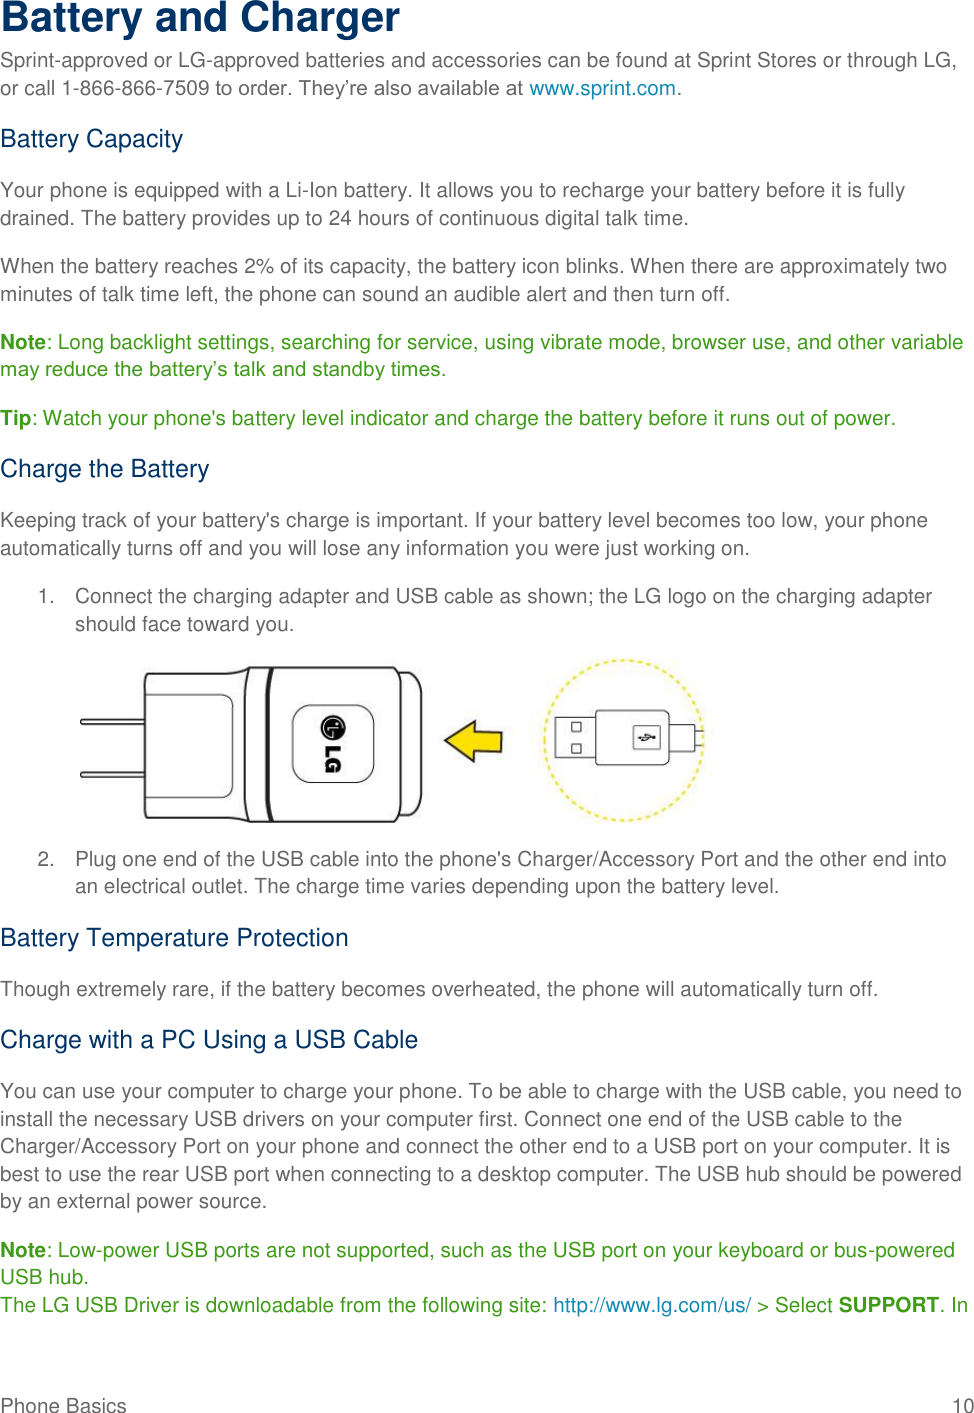 Phone Basics  10 Battery and Charger Sprint-approved or LG-approved batteries and accessories can be found at Sprint Stores or through LG, or call 1-866-866-7509 to order. They‘re also available at www.sprint.com. Battery Capacity Your phone is equipped with a Li-Ion battery. It allows you to recharge your battery before it is fully drained. The battery provides up to 24 hours of continuous digital talk time. When the battery reaches 2% of its capacity, the battery icon blinks. When there are approximately two minutes of talk time left, the phone can sound an audible alert and then turn off. Note: Long backlight settings, searching for service, using vibrate mode, browser use, and other variable may reduce the battery‘s talk and standby times. Tip: Watch your phone&apos;s battery level indicator and charge the battery before it runs out of power. Charge the Battery  Keeping track of your battery&apos;s charge is important. If your battery level becomes too low, your phone automatically turns off and you will lose any information you were just working on.  1.  Connect the charging adapter and USB cable as shown; the LG logo on the charging adapter should face toward you.     2.  Plug one end of the USB cable into the phone&apos;s Charger/Accessory Port and the other end into an electrical outlet. The charge time varies depending upon the battery level.  Battery Temperature Protection Though extremely rare, if the battery becomes overheated, the phone will automatically turn off. Charge with a PC Using a USB Cable You can use your computer to charge your phone. To be able to charge with the USB cable, you need to install the necessary USB drivers on your computer first. Connect one end of the USB cable to the Charger/Accessory Port on your phone and connect the other end to a USB port on your computer. It is best to use the rear USB port when connecting to a desktop computer. The USB hub should be powered by an external power source. Note: Low-power USB ports are not supported, such as the USB port on your keyboard or bus-powered USB hub. The LG USB Driver is downloadable from the following site: http://www.lg.com/us/ &gt; Select SUPPORT. In 